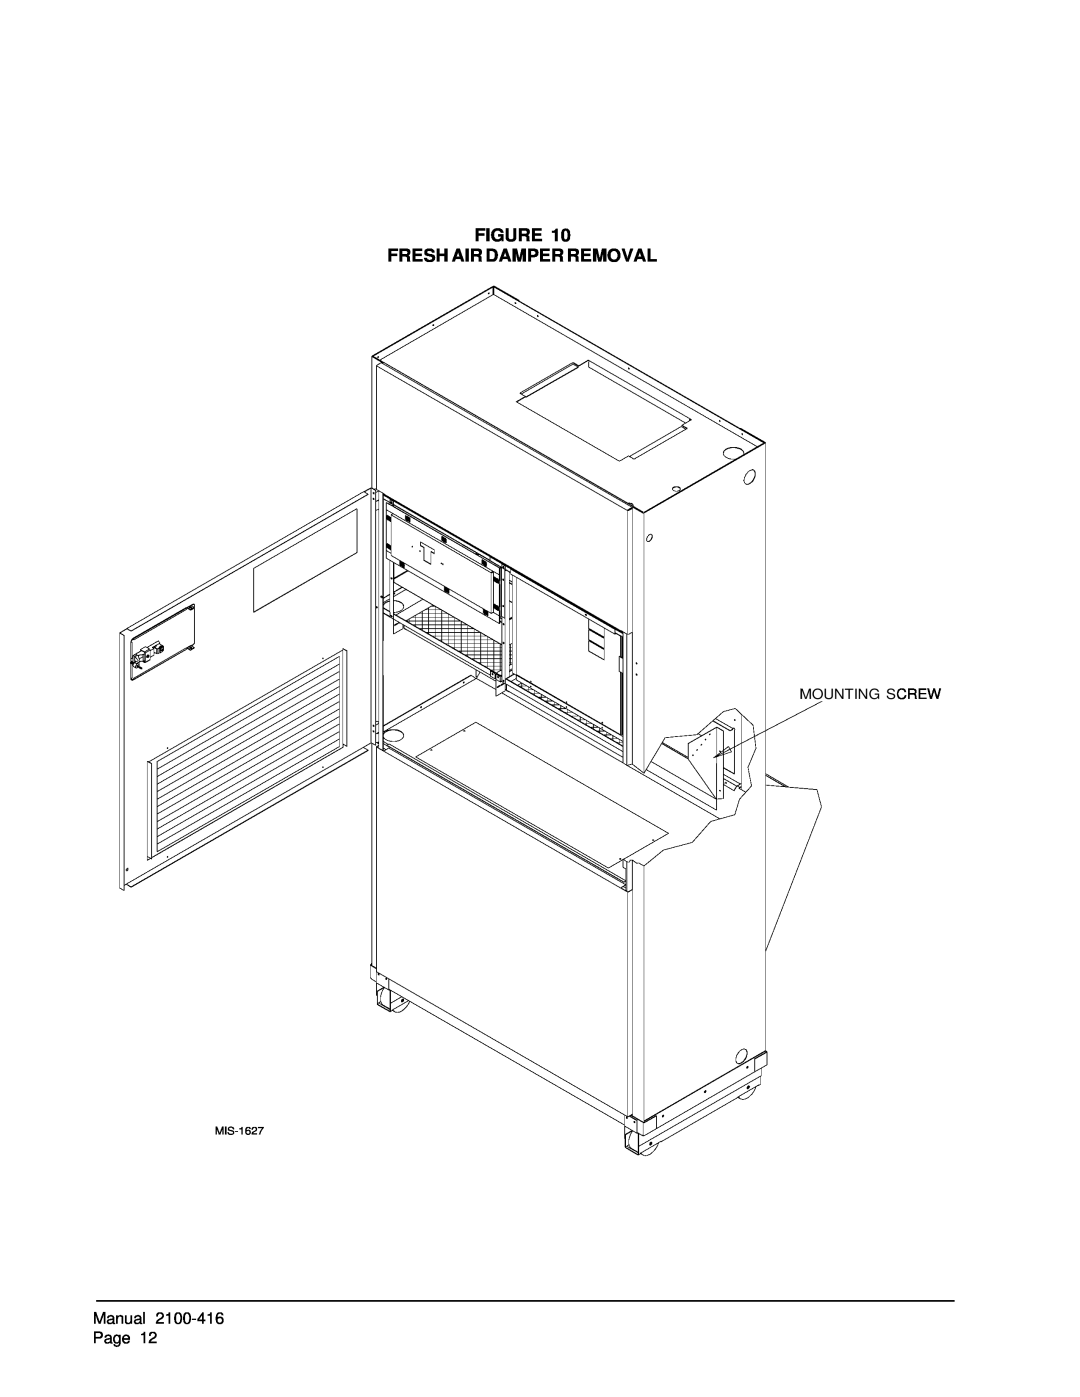 Bard QC501 installation instructions Figure Fresh Air Damper Removal, Mounting Screw, MIS-1627 